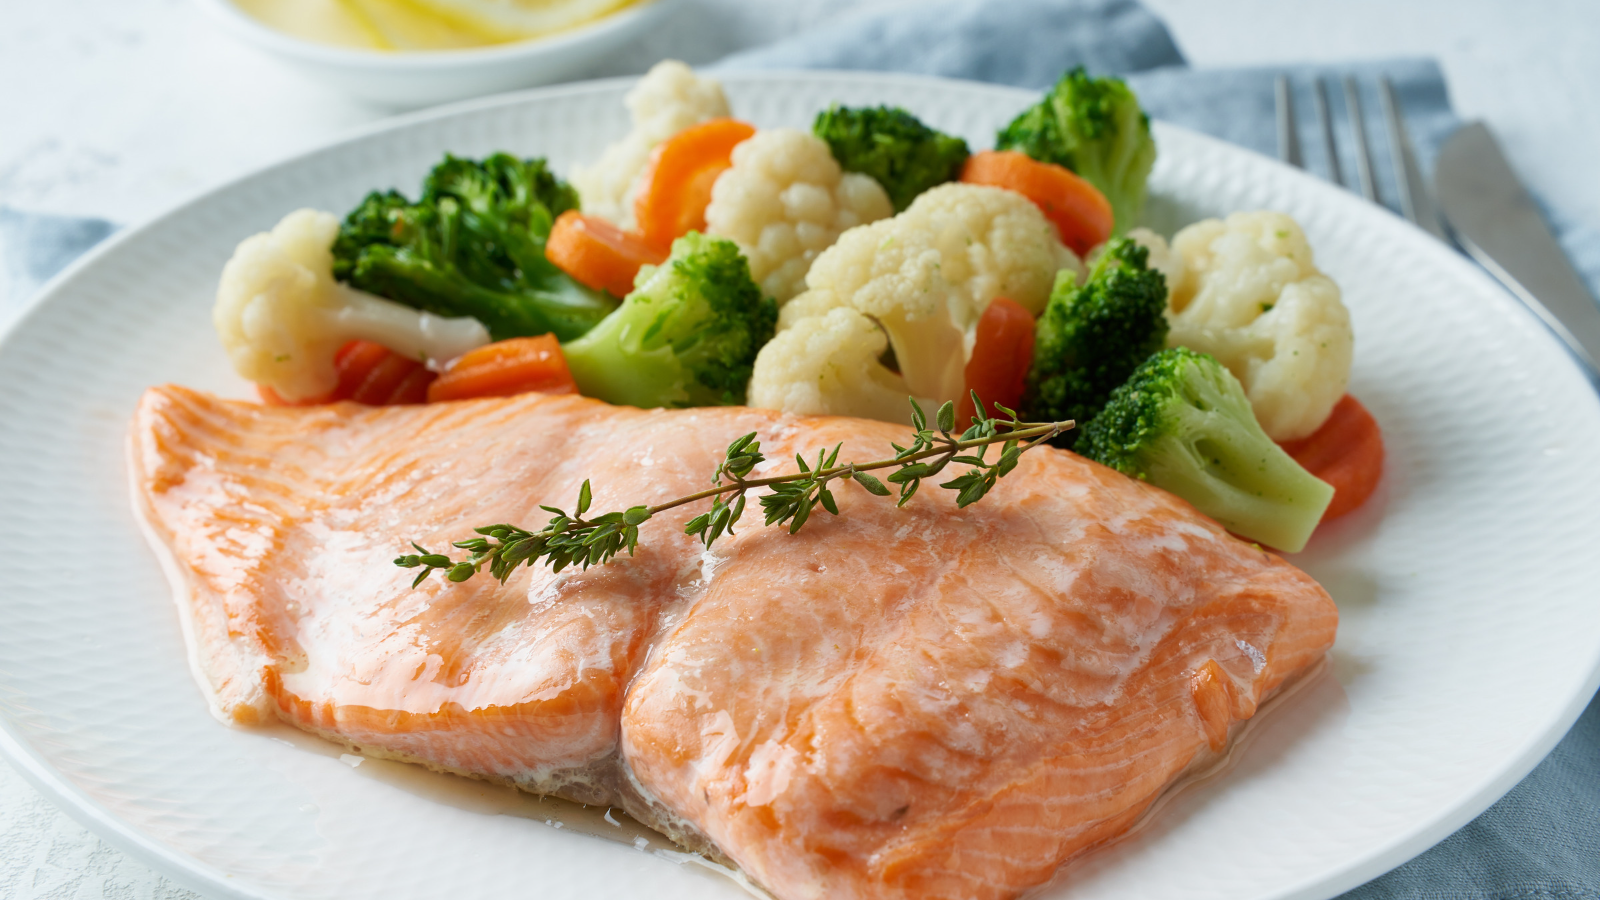 Steamed salmon and mixed vegetables on white plate